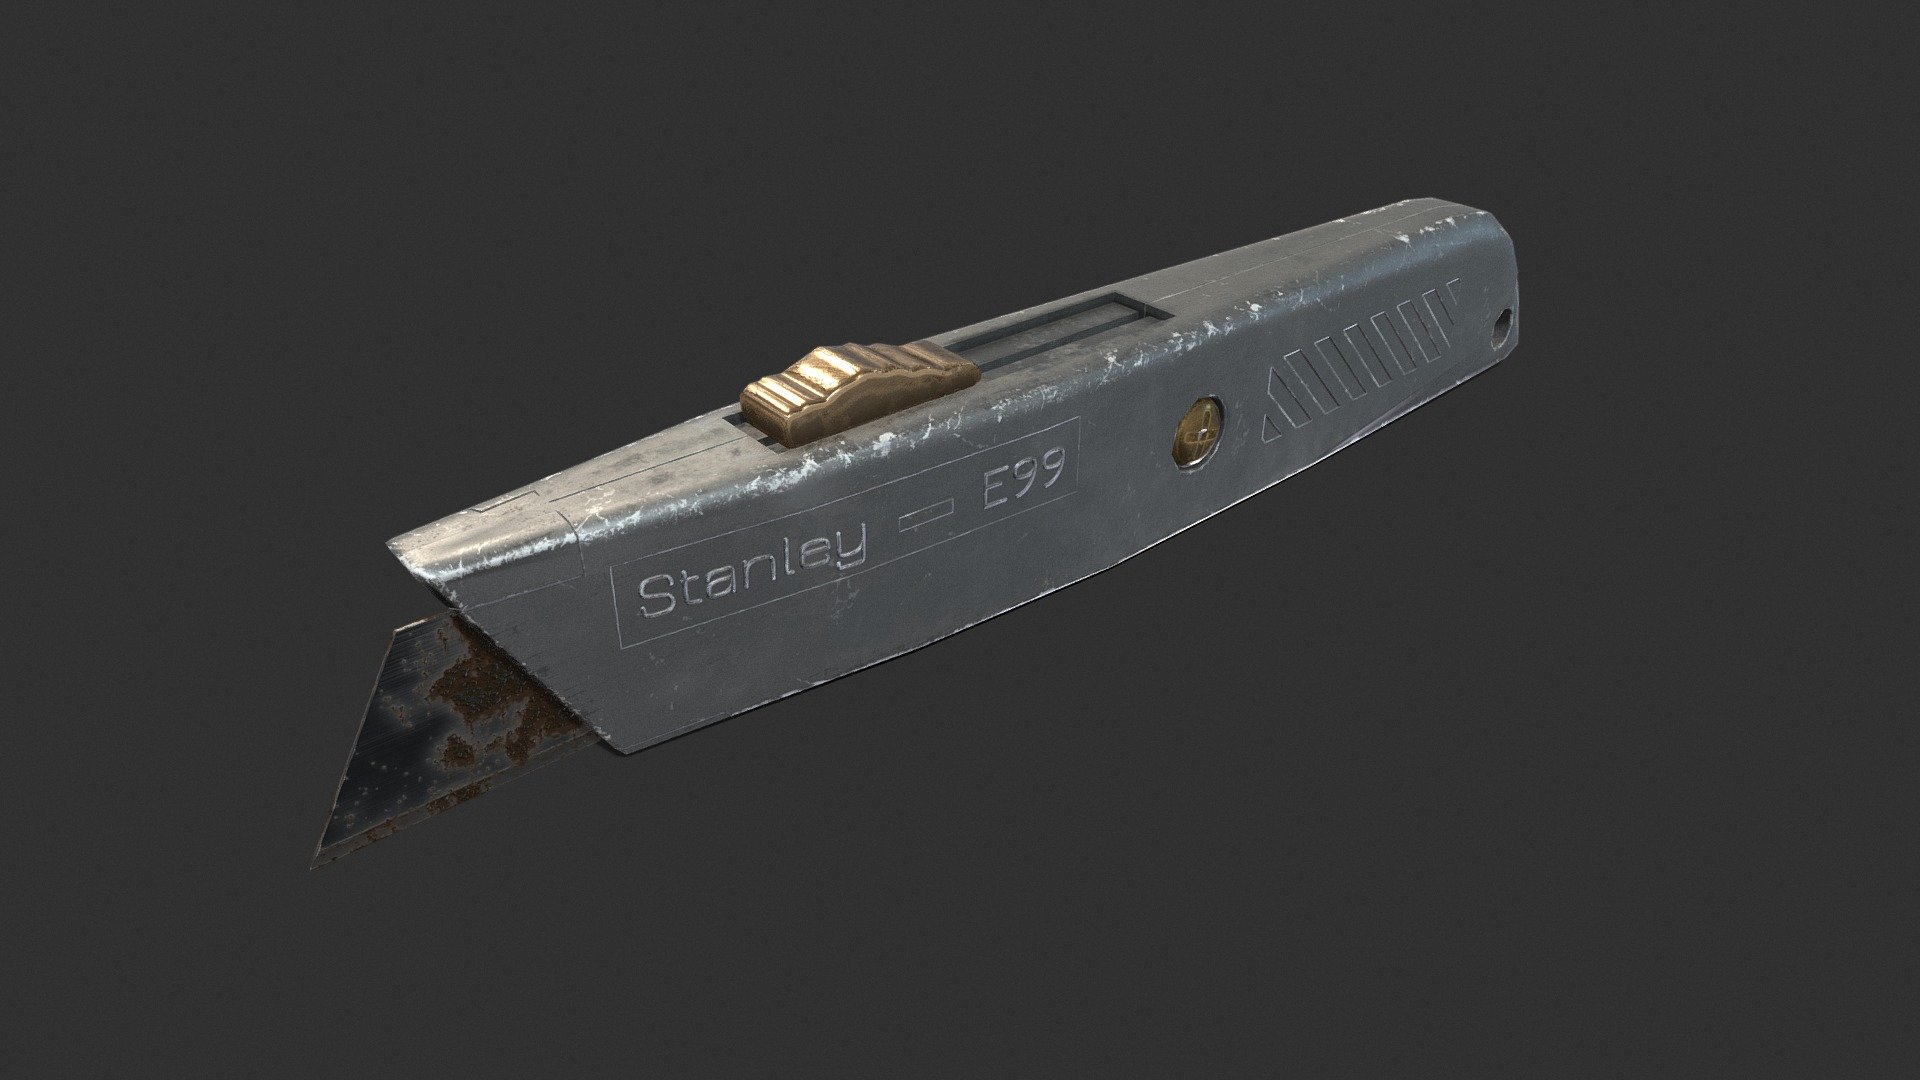 3D model of Used Box Cutter
Resolution of textures: 4096x4096
 - Originally created with 3ds Max 2017
 - Textured created with Substance Painter
 - Unit system is set to centimetre
 - Model is built to real-world scale
 - Rendered in Marmoset Toolbag, 3ds Max Vray, Maya Vray
 - Texture Set: Diffuse, Base Color, IOR, Gloss, Heigh, IOR, Normal, Reflection, Specular

Special notes:

.fbx format is recommended for import in other 3d software. If your software doesn't support .fbx format, please use .3ds format; .obj, format was exported from 3ds Max 3d model